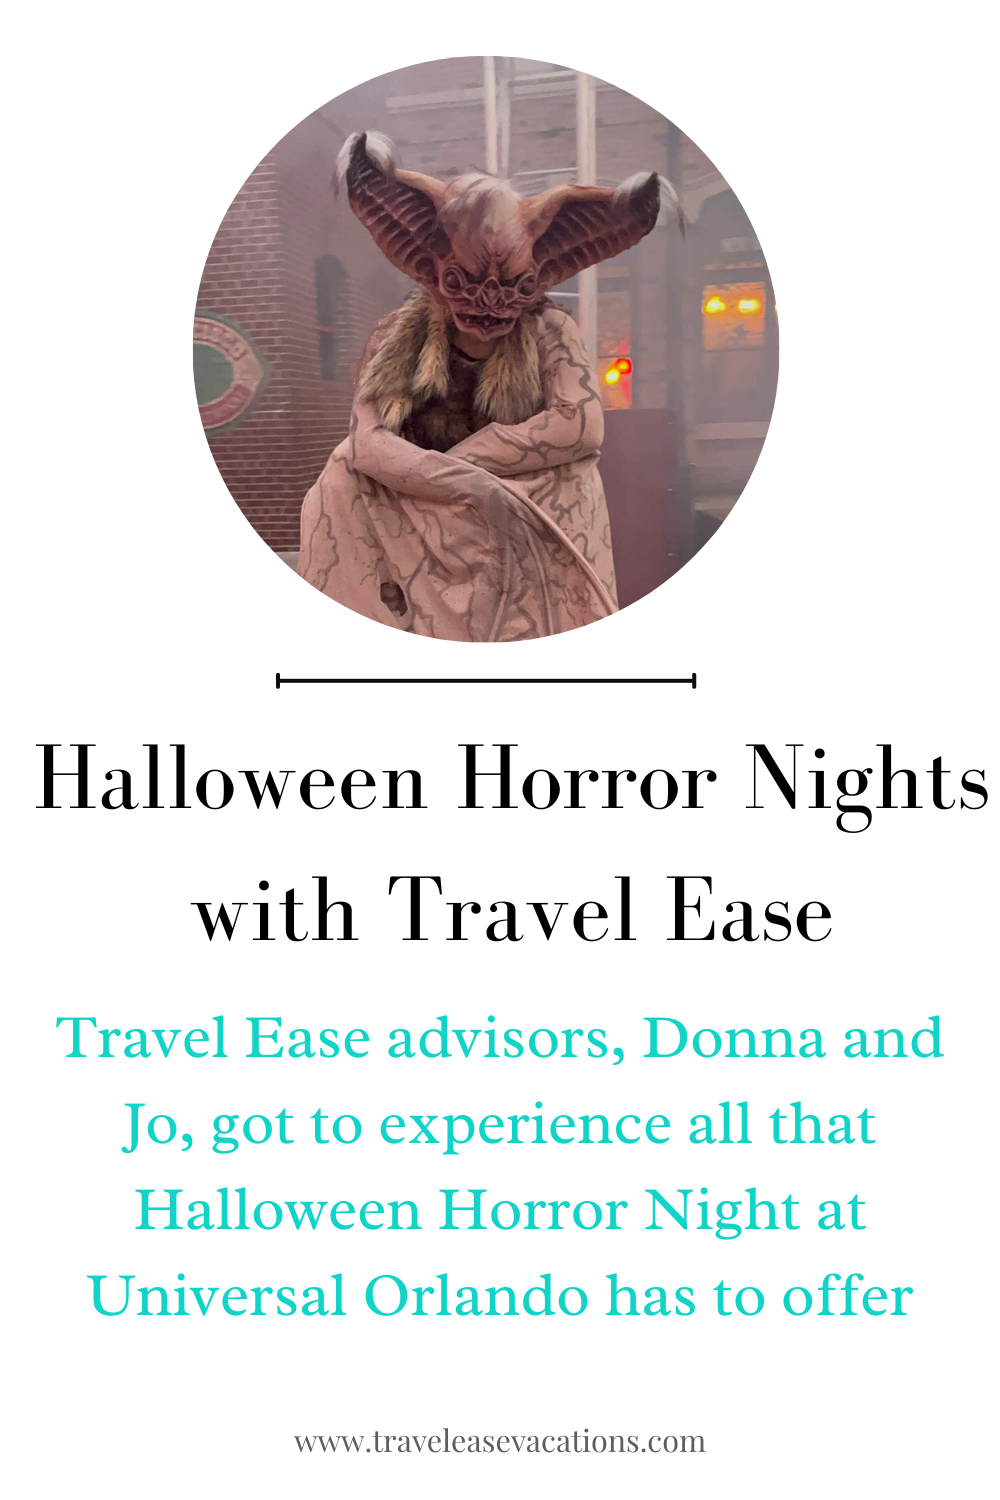 Halloween Horror nights with Travel Ease